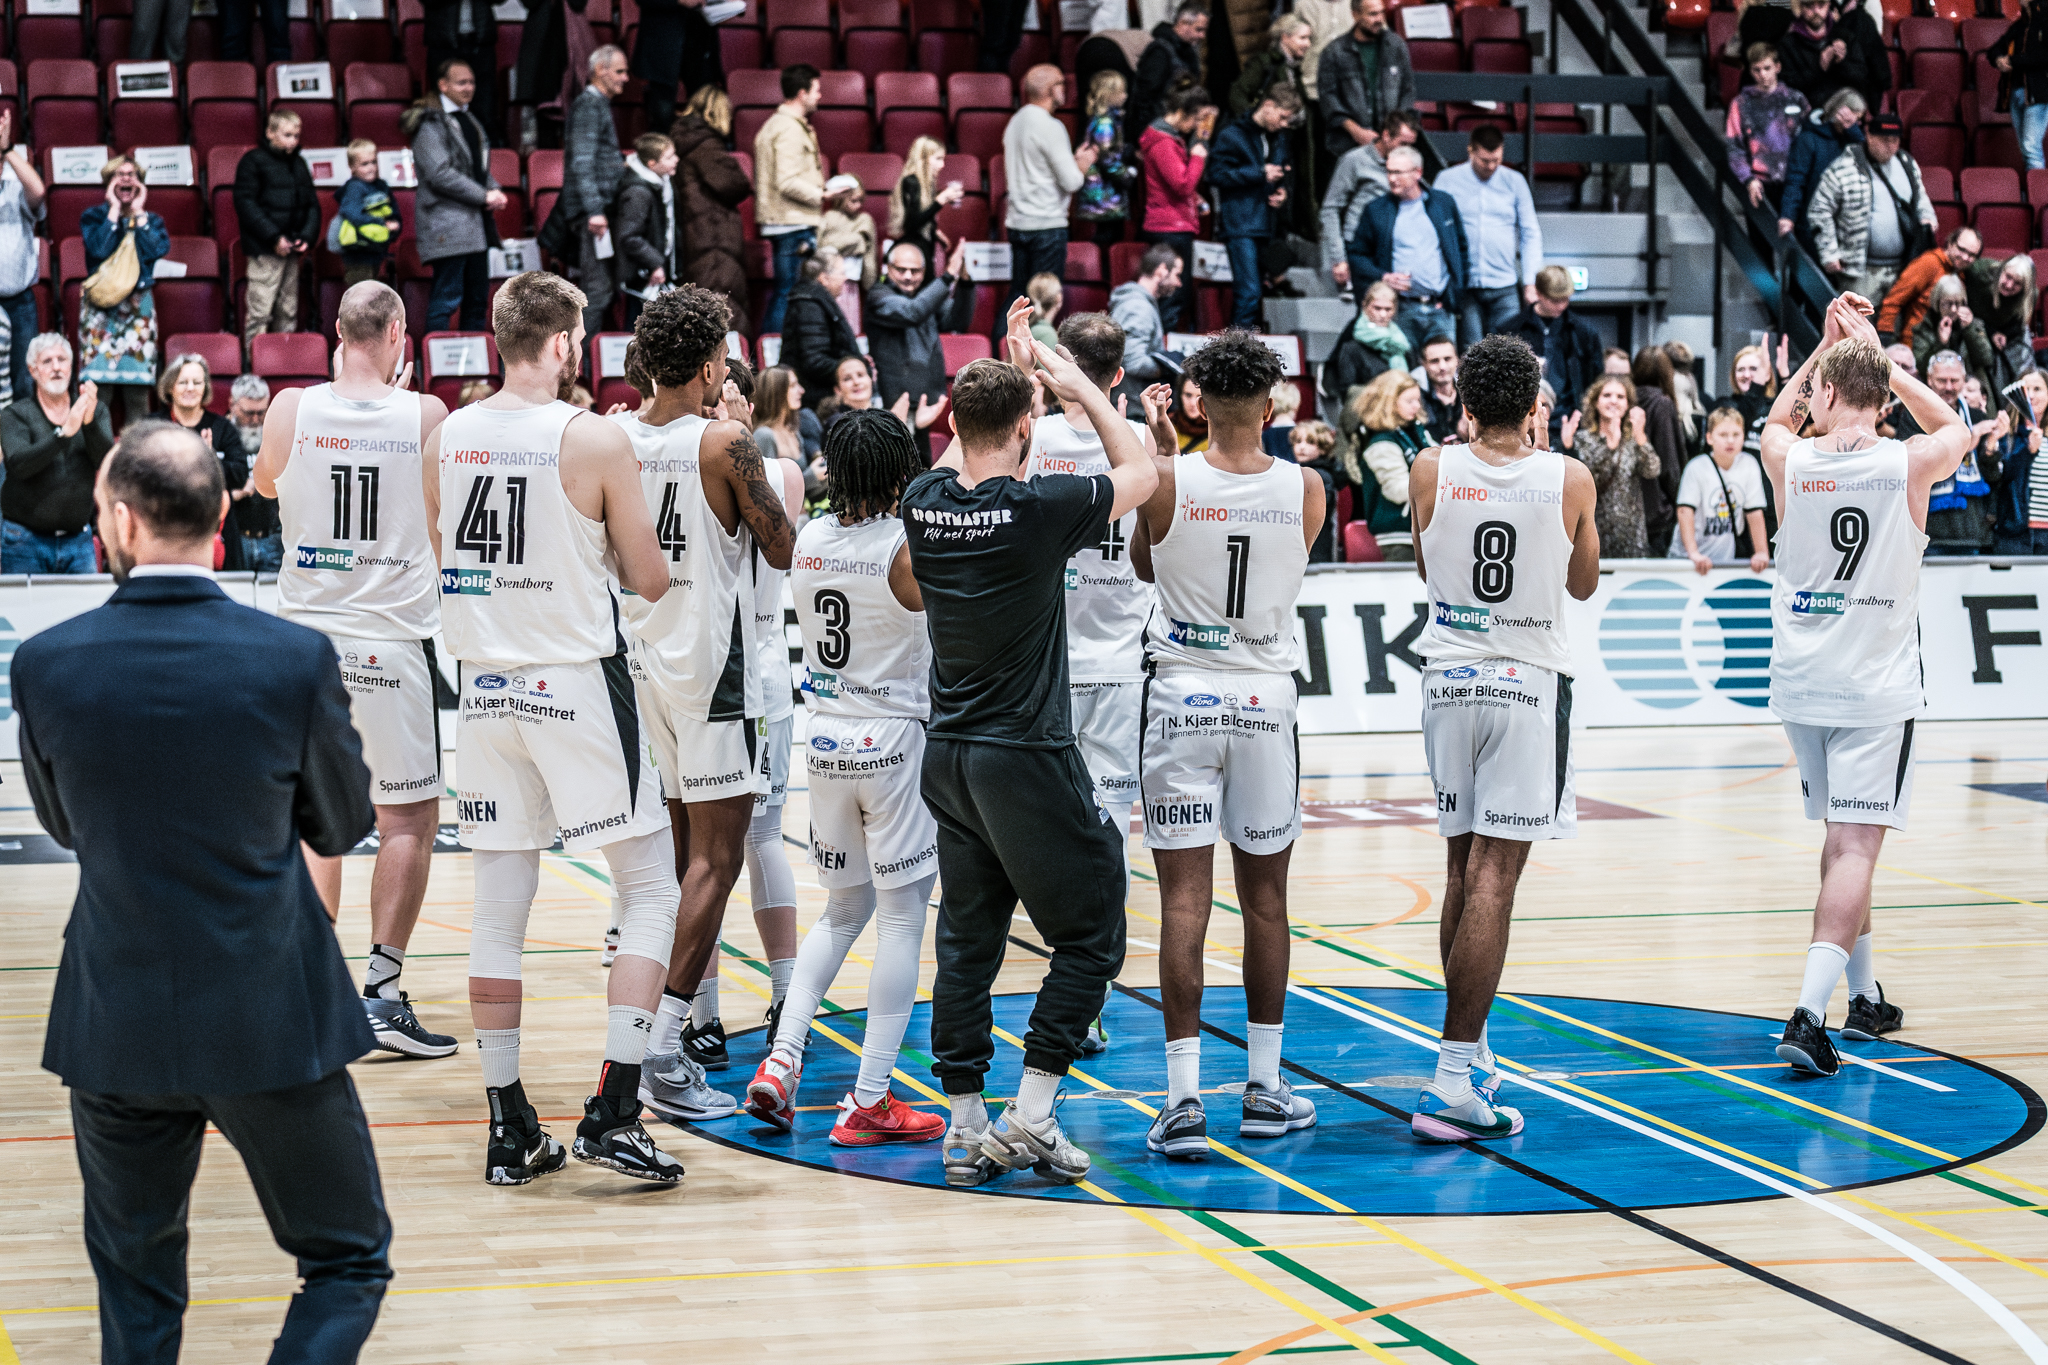 Featured image for “Blowout vs BK Amager”